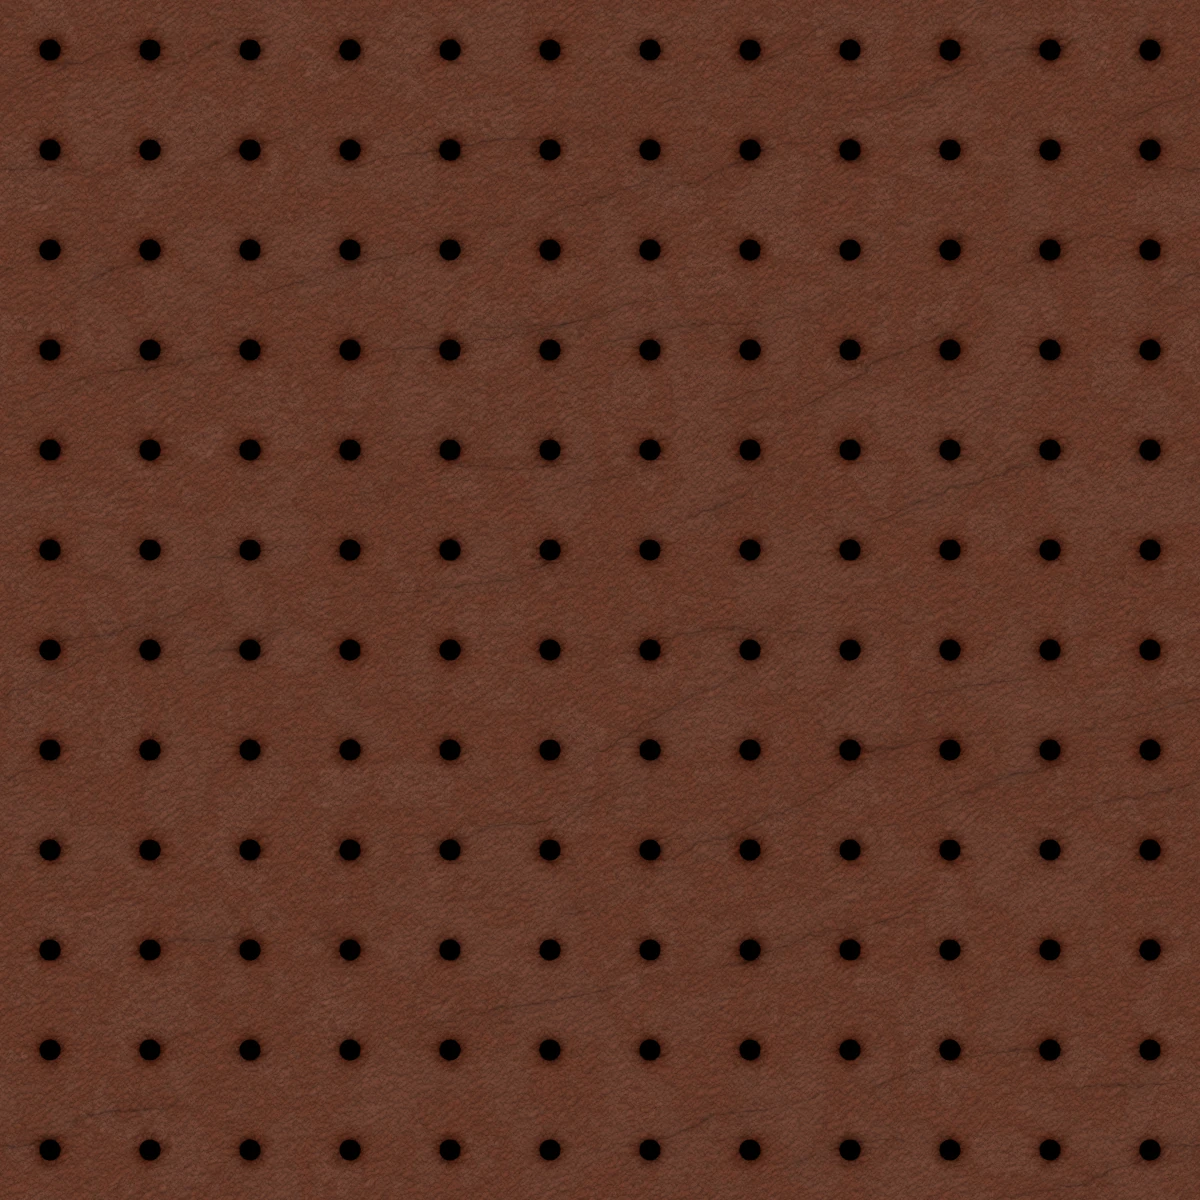 Studded Leather PBR Texture | Texture